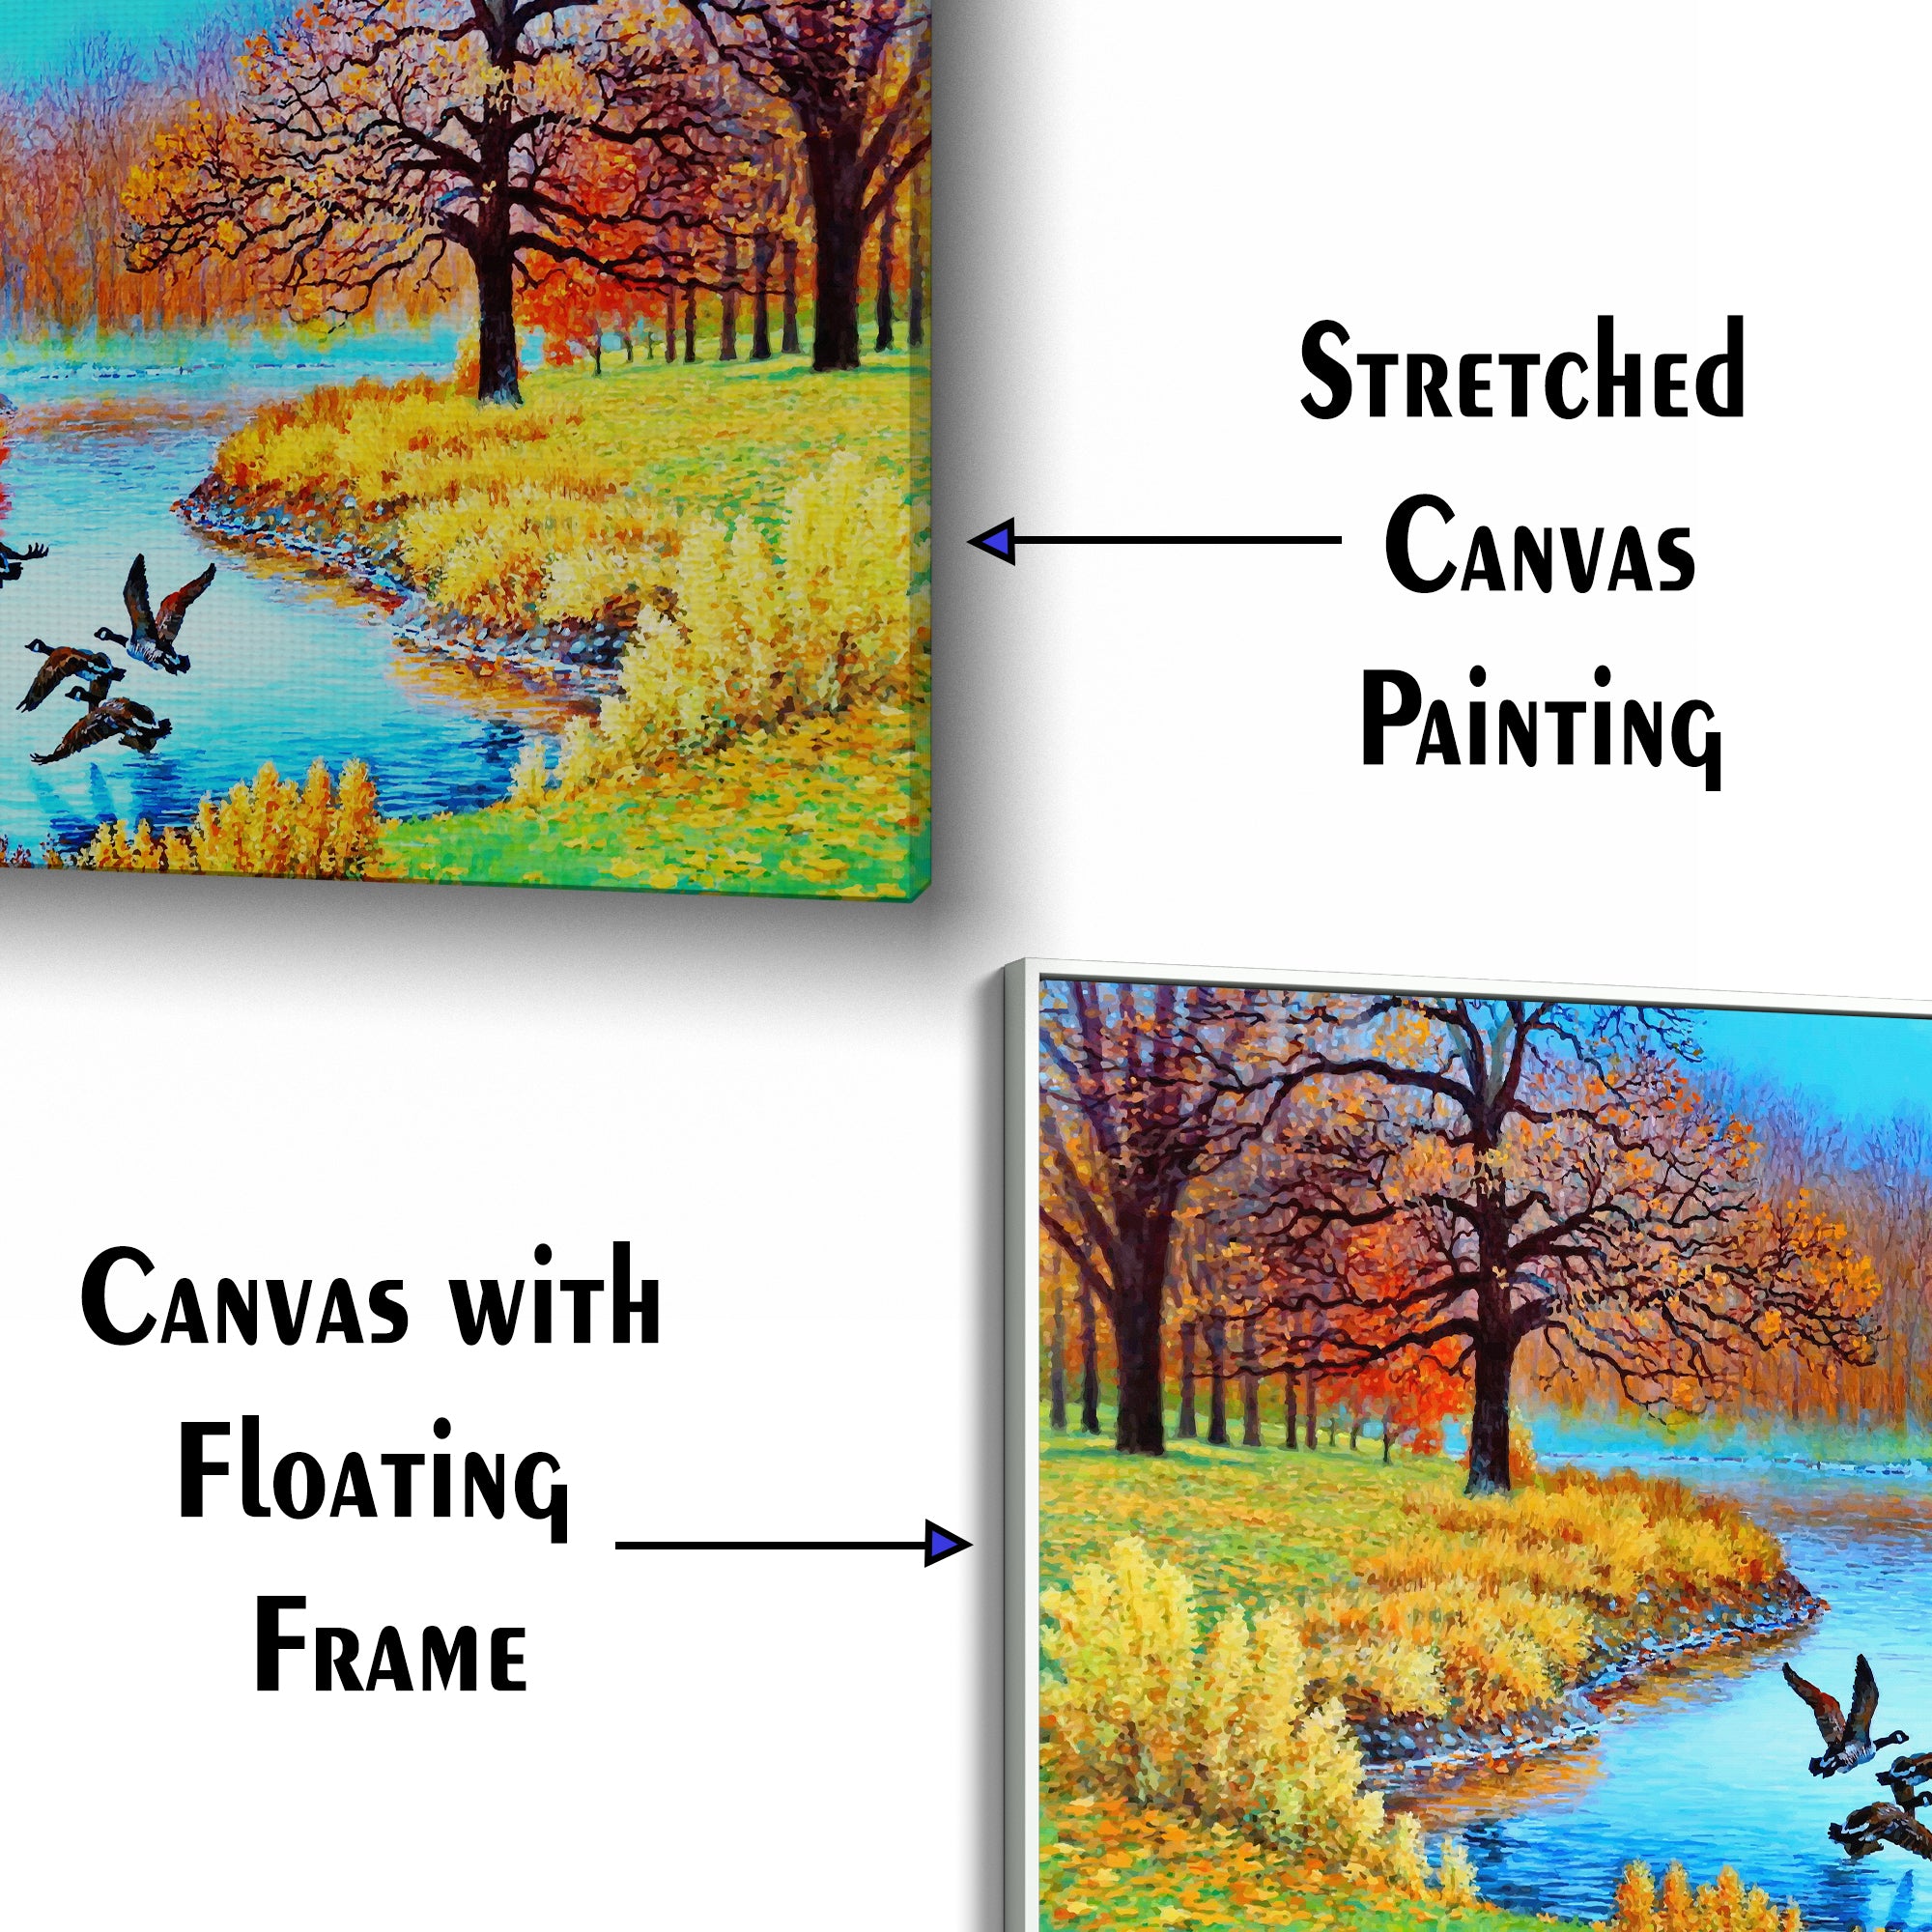 Beautiful Lake And Birds Scenery Canvas Wall Painting